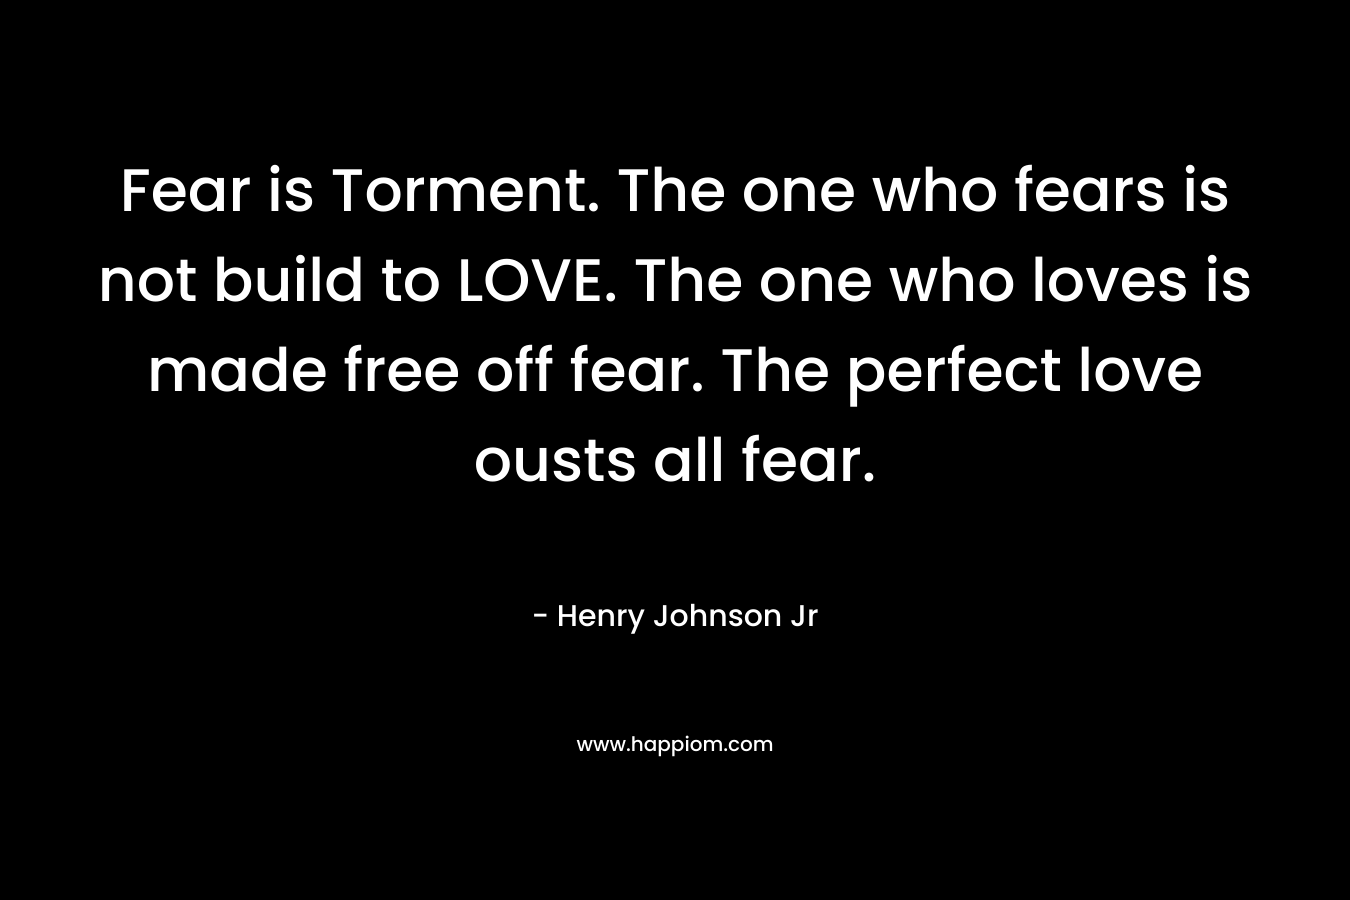 Fear is Torment. The one who fears is not build to LOVE. The one who loves is made free off fear. The perfect love ousts all fear. – Henry Johnson Jr